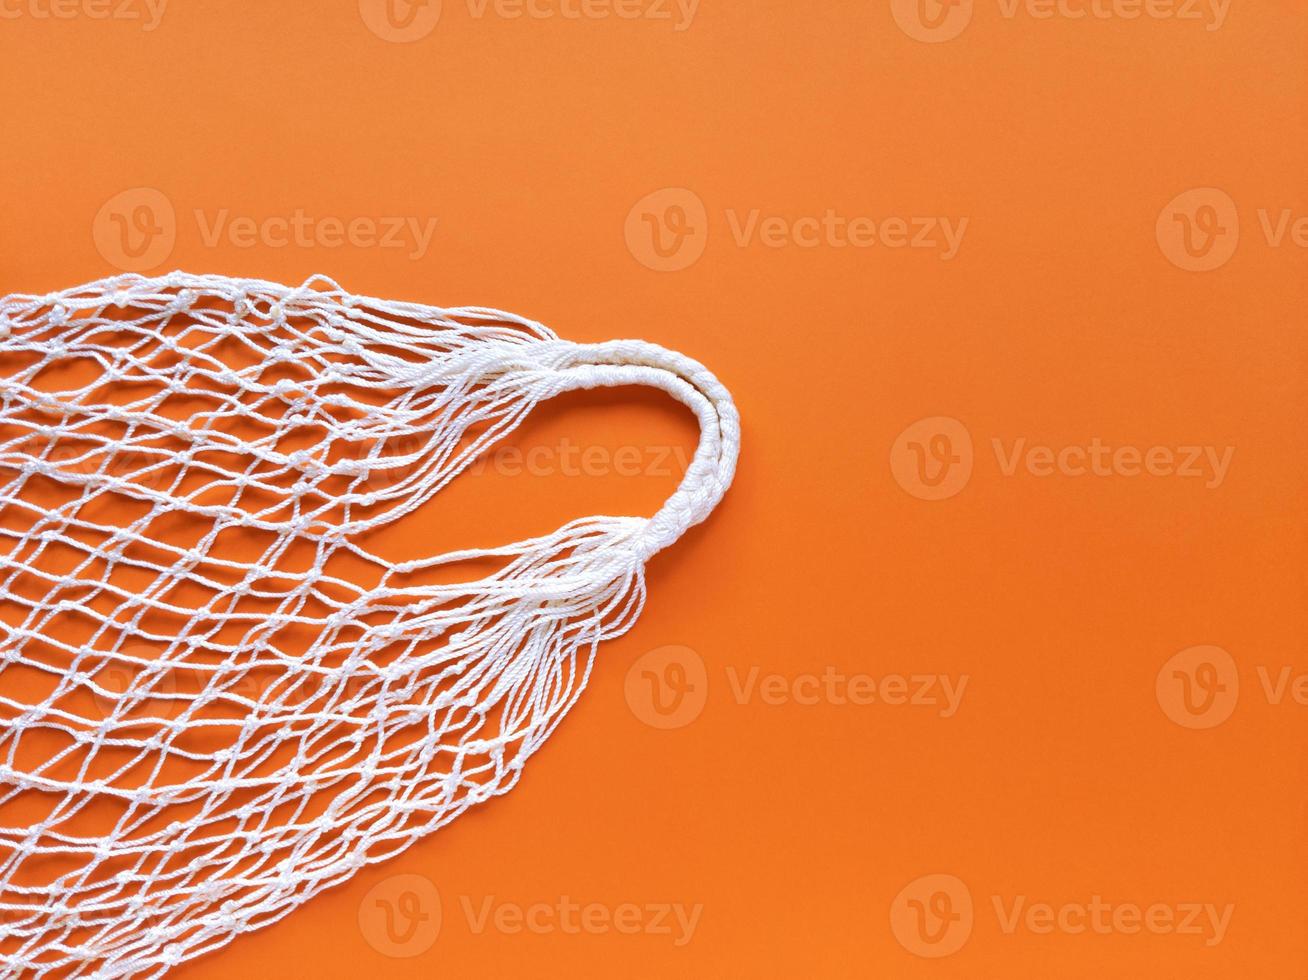 White string cotton eco bag on orange background Simple flat lay with copy space Ecology zero waste concept Stock photography photo